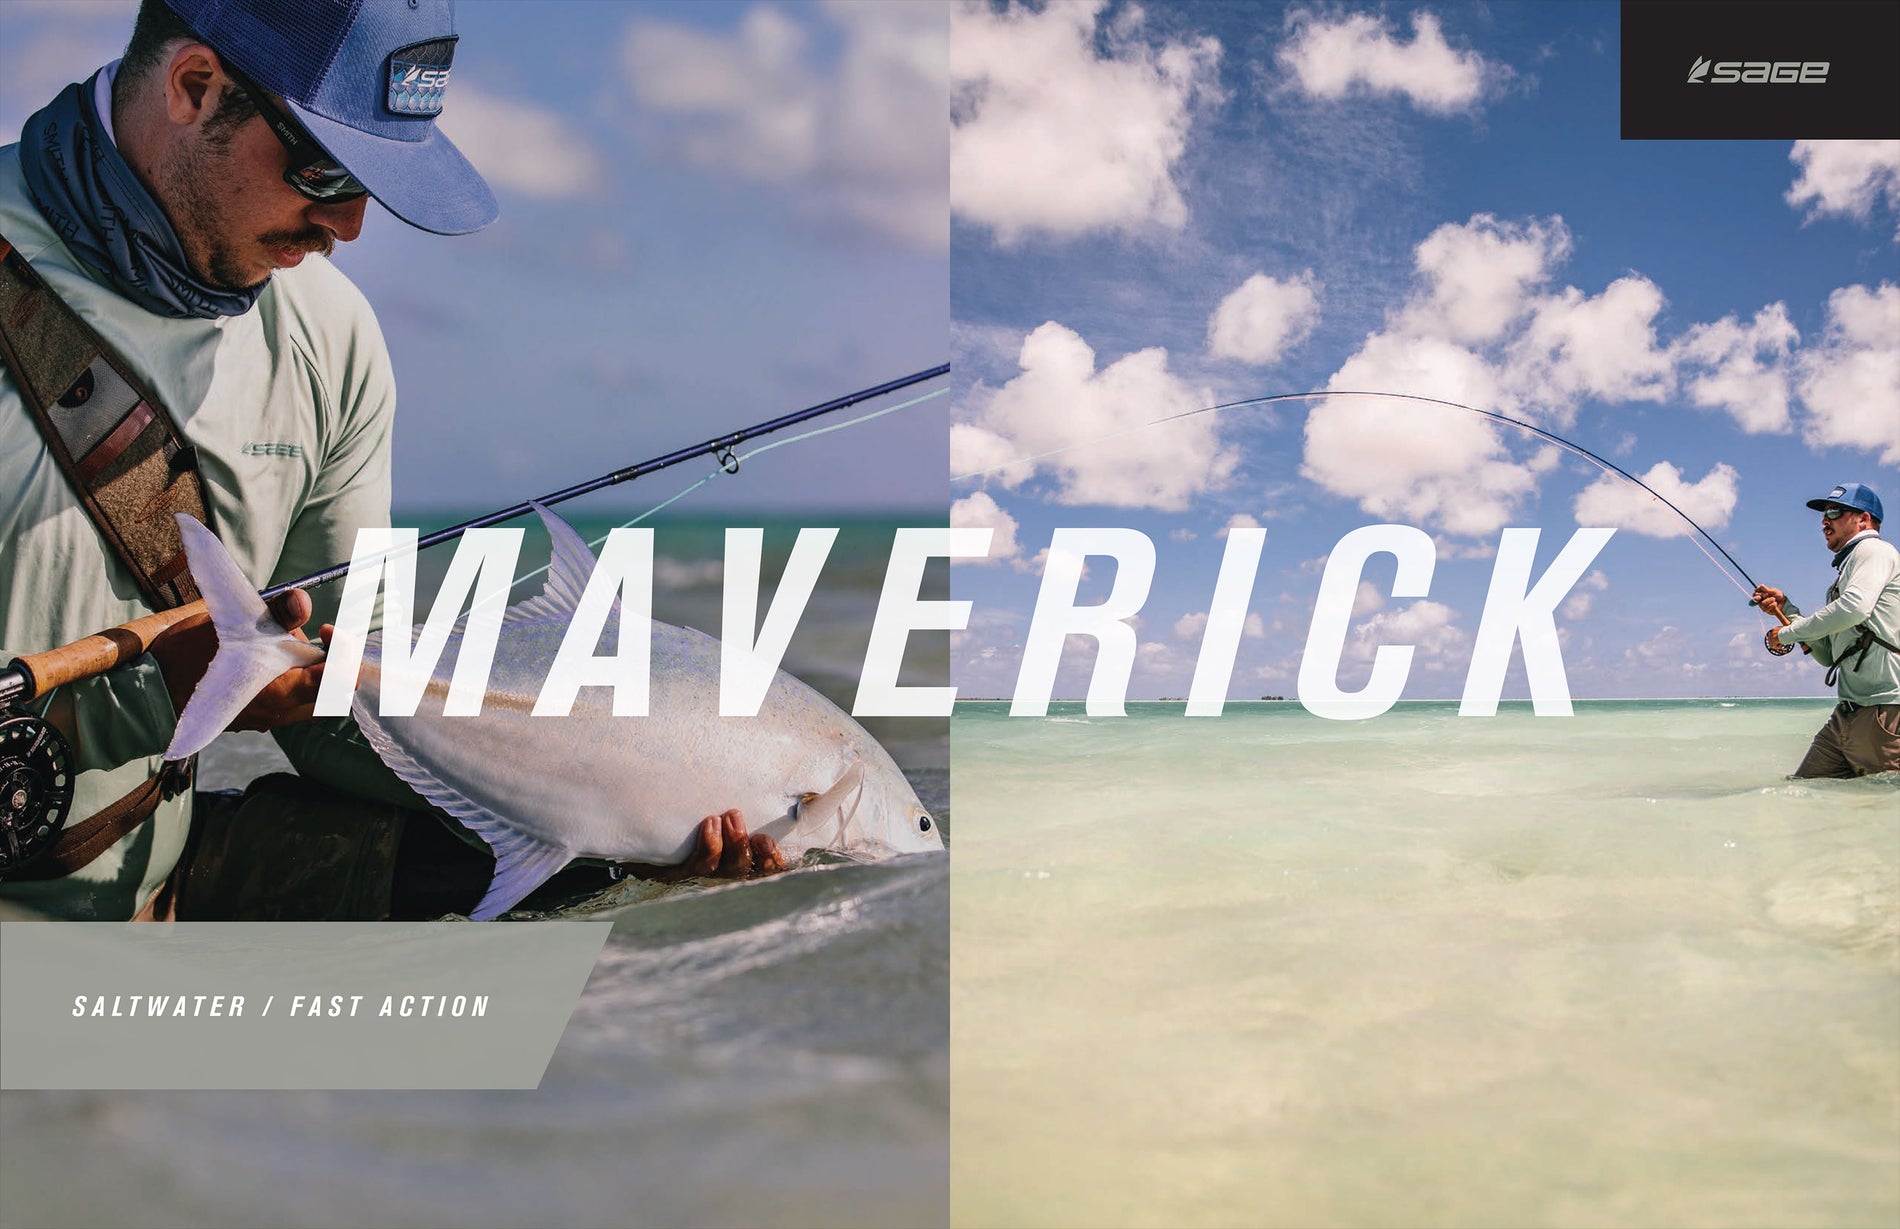 Sage MAVERICK Fly Rod Review - The NEW Sage Maverick for Saltwater Fly